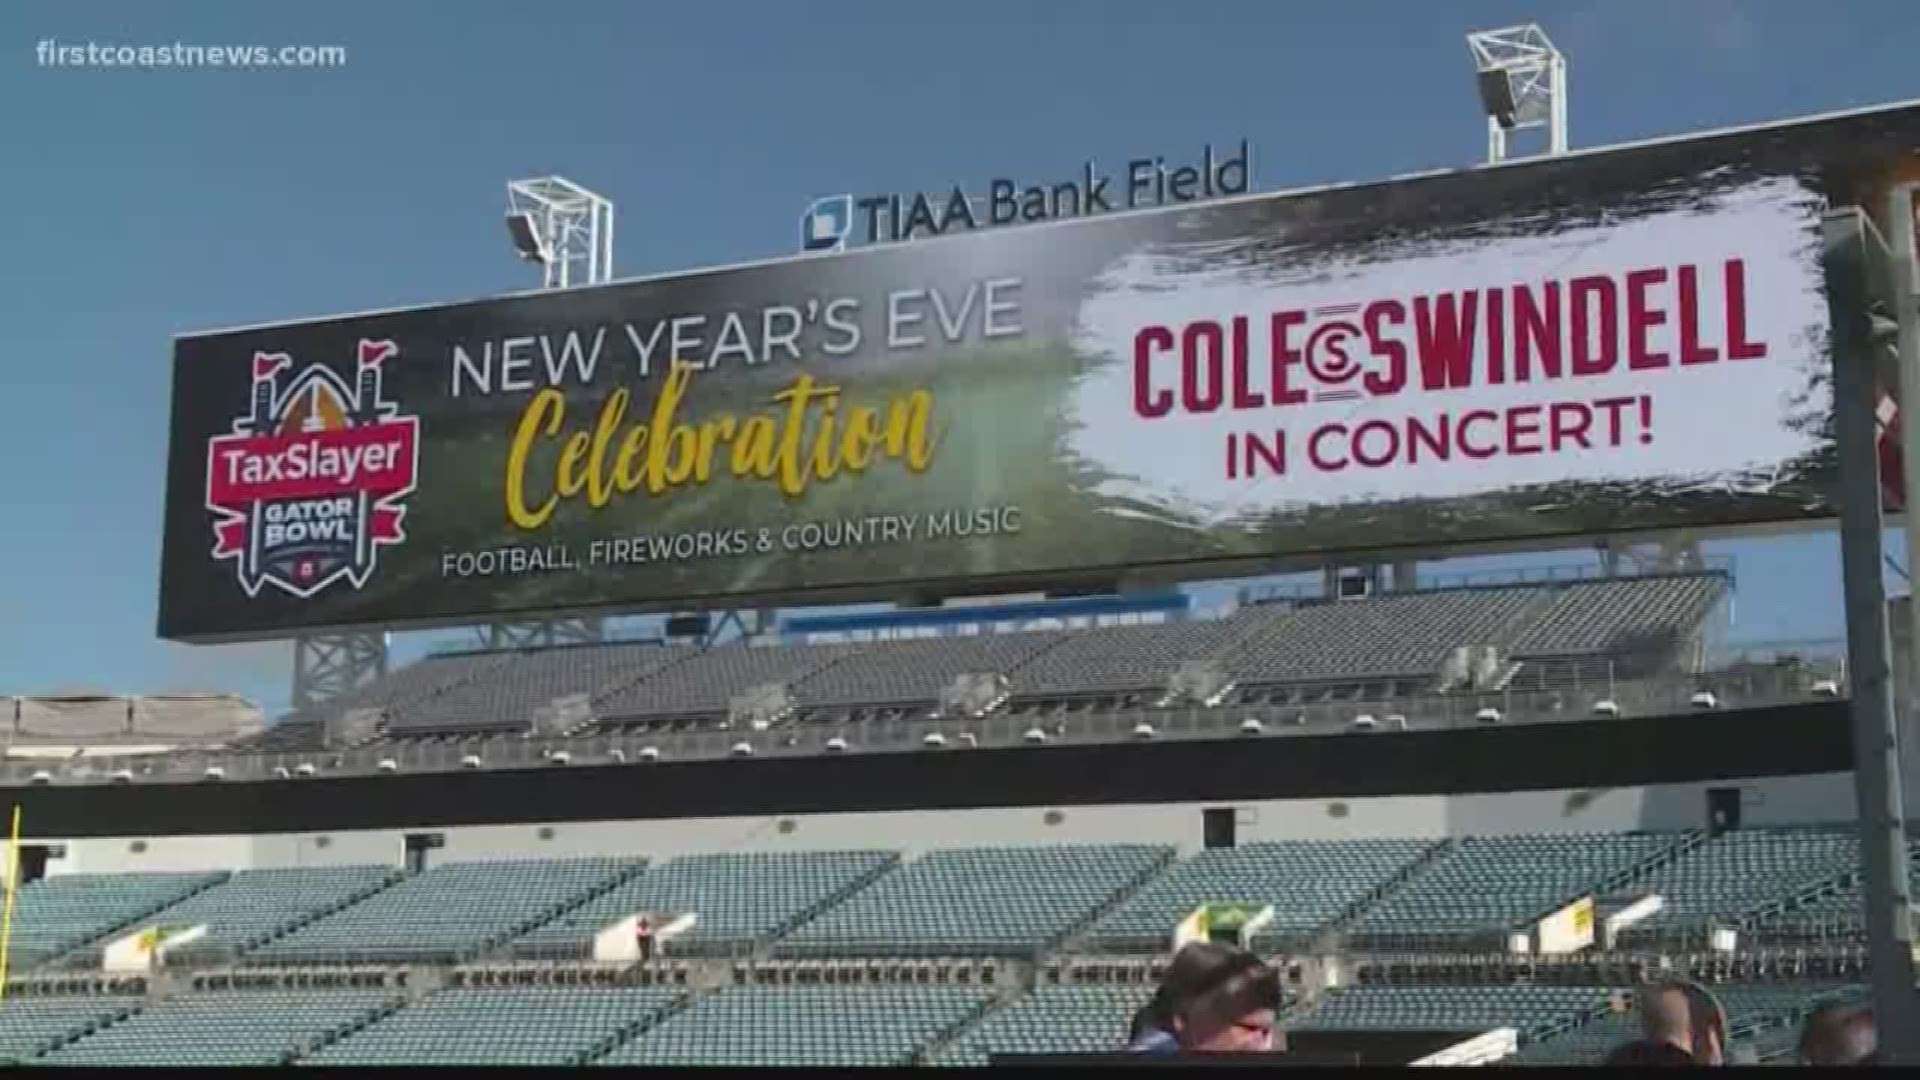 Football, fireworks, and a concert with country star Cole Swindell. For the first time in about 25 years, the TaxSlayer Gator Bowl will be primetime.